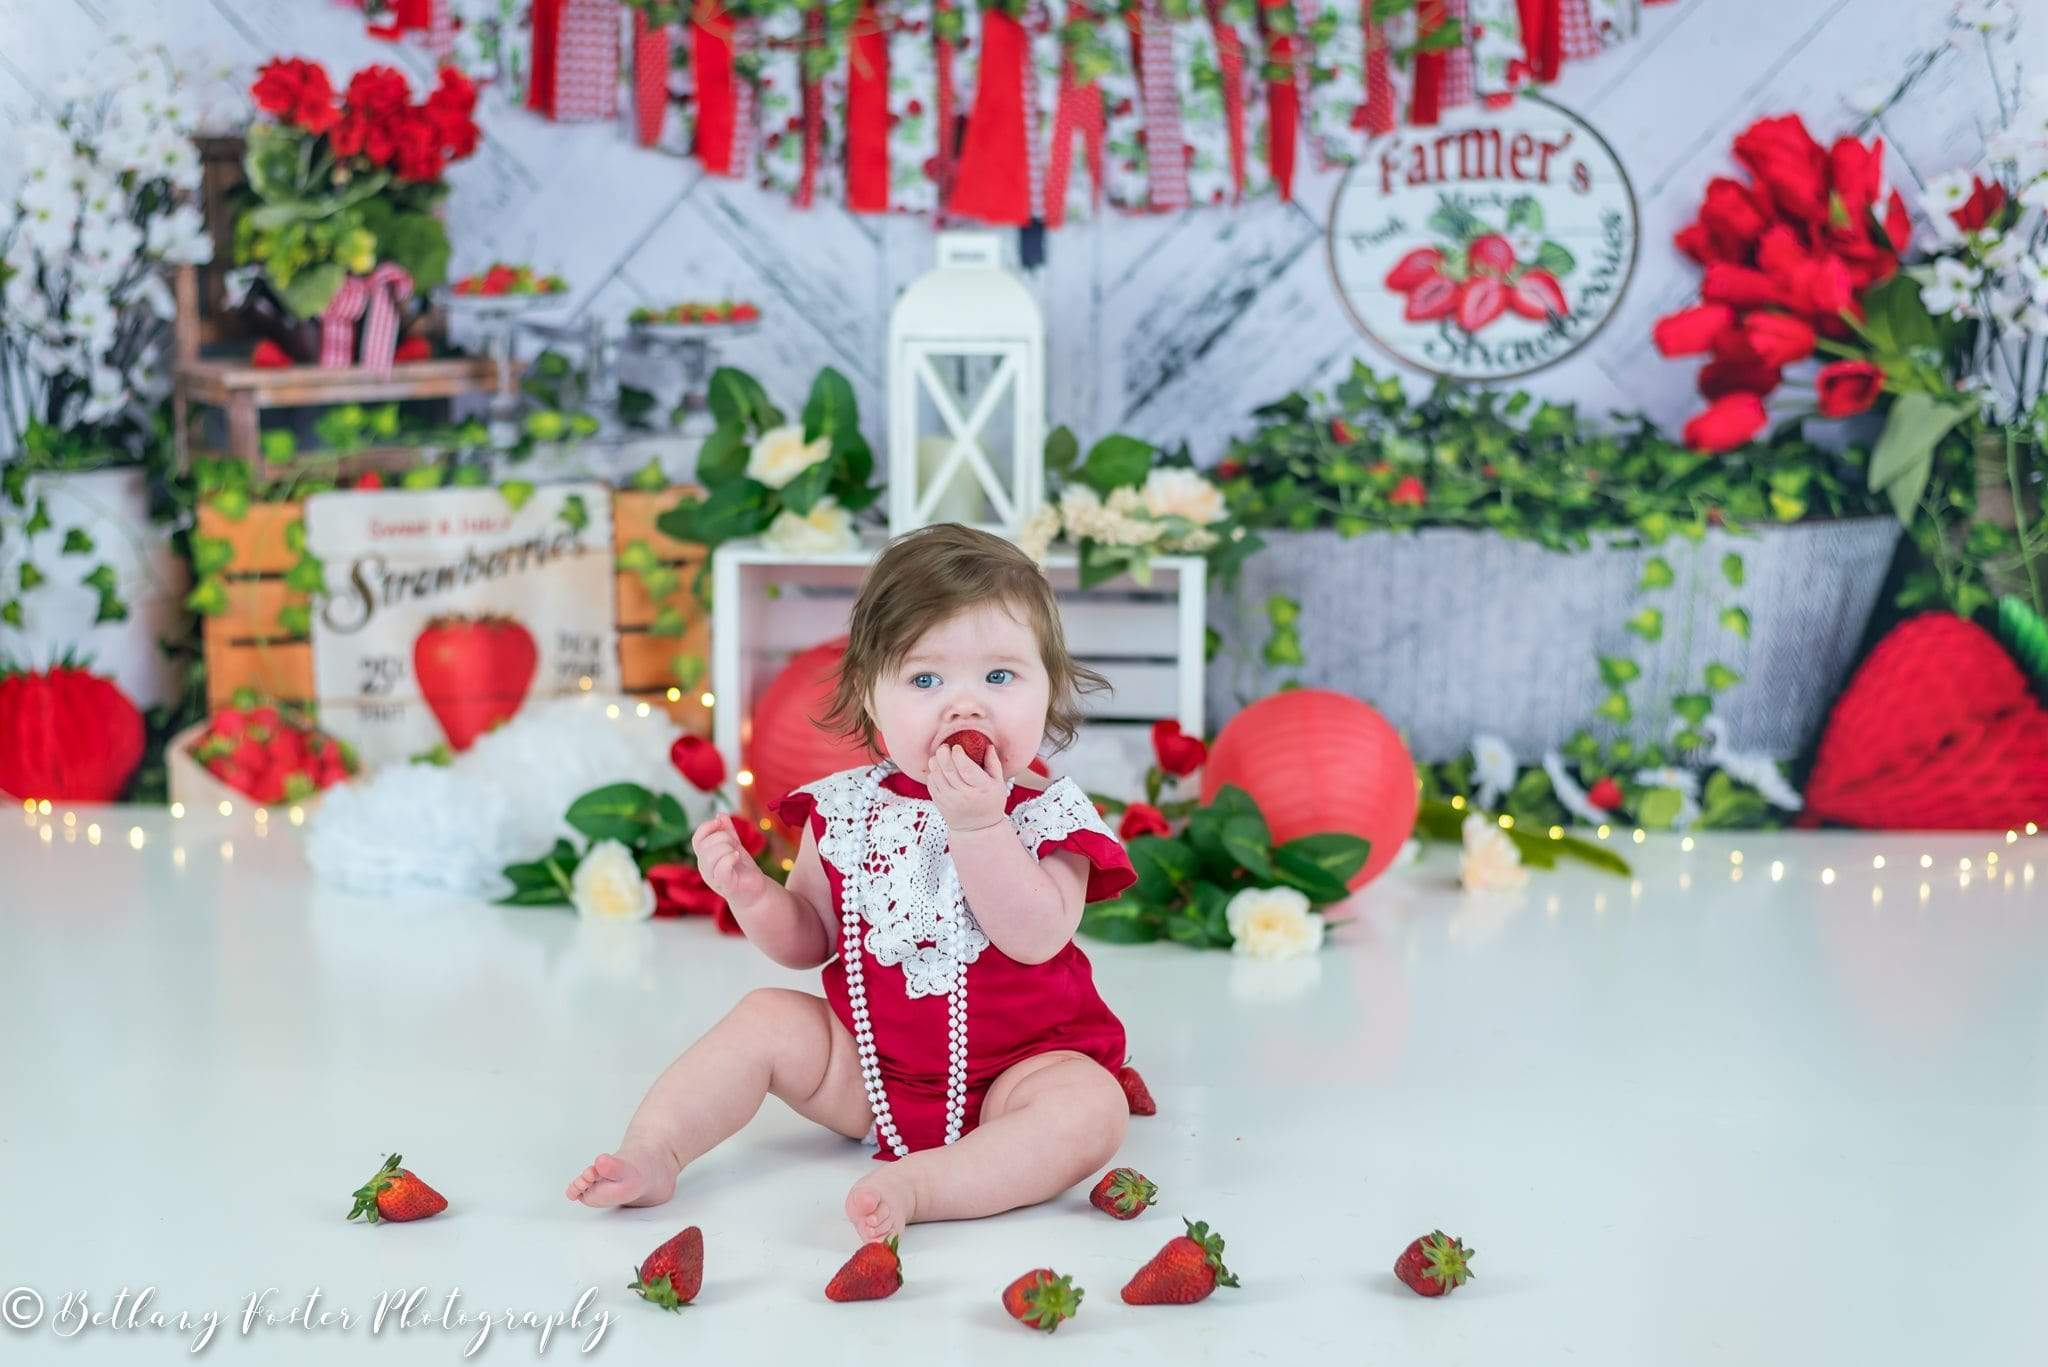 Katebackdrop鎷㈡綖Kate Summer Strawberry White Wooden Board With Banners Backdrop